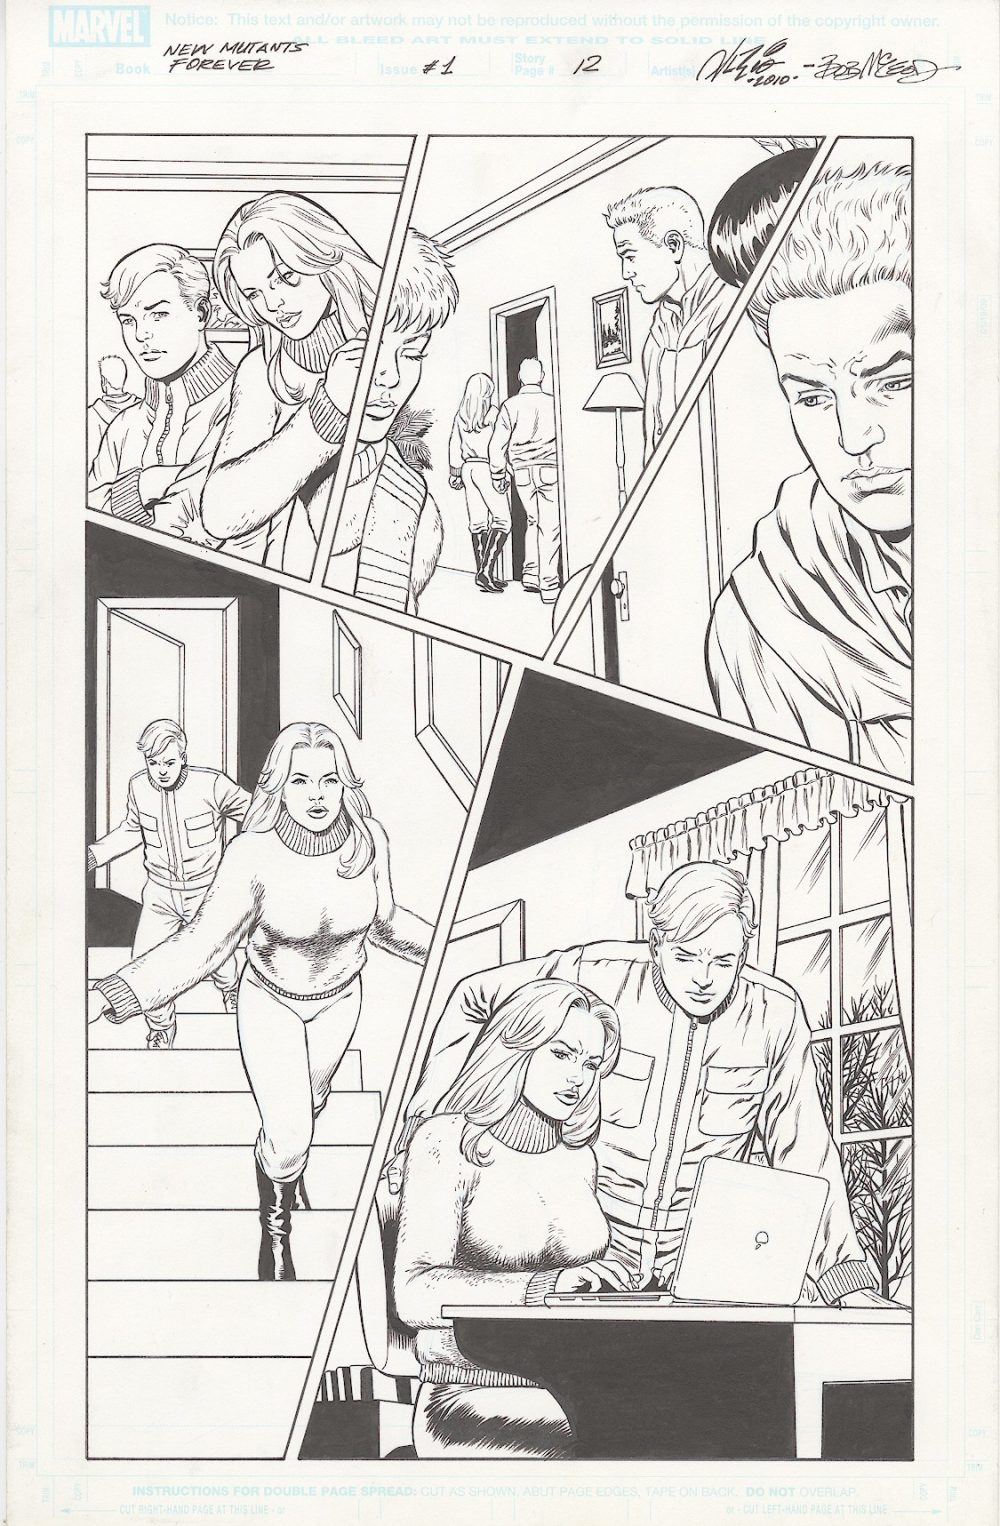 New Mutants Forever – #1, page 12 – pencils by Al Rio, Inks by Bob McLeod, Script by Chris Claremont